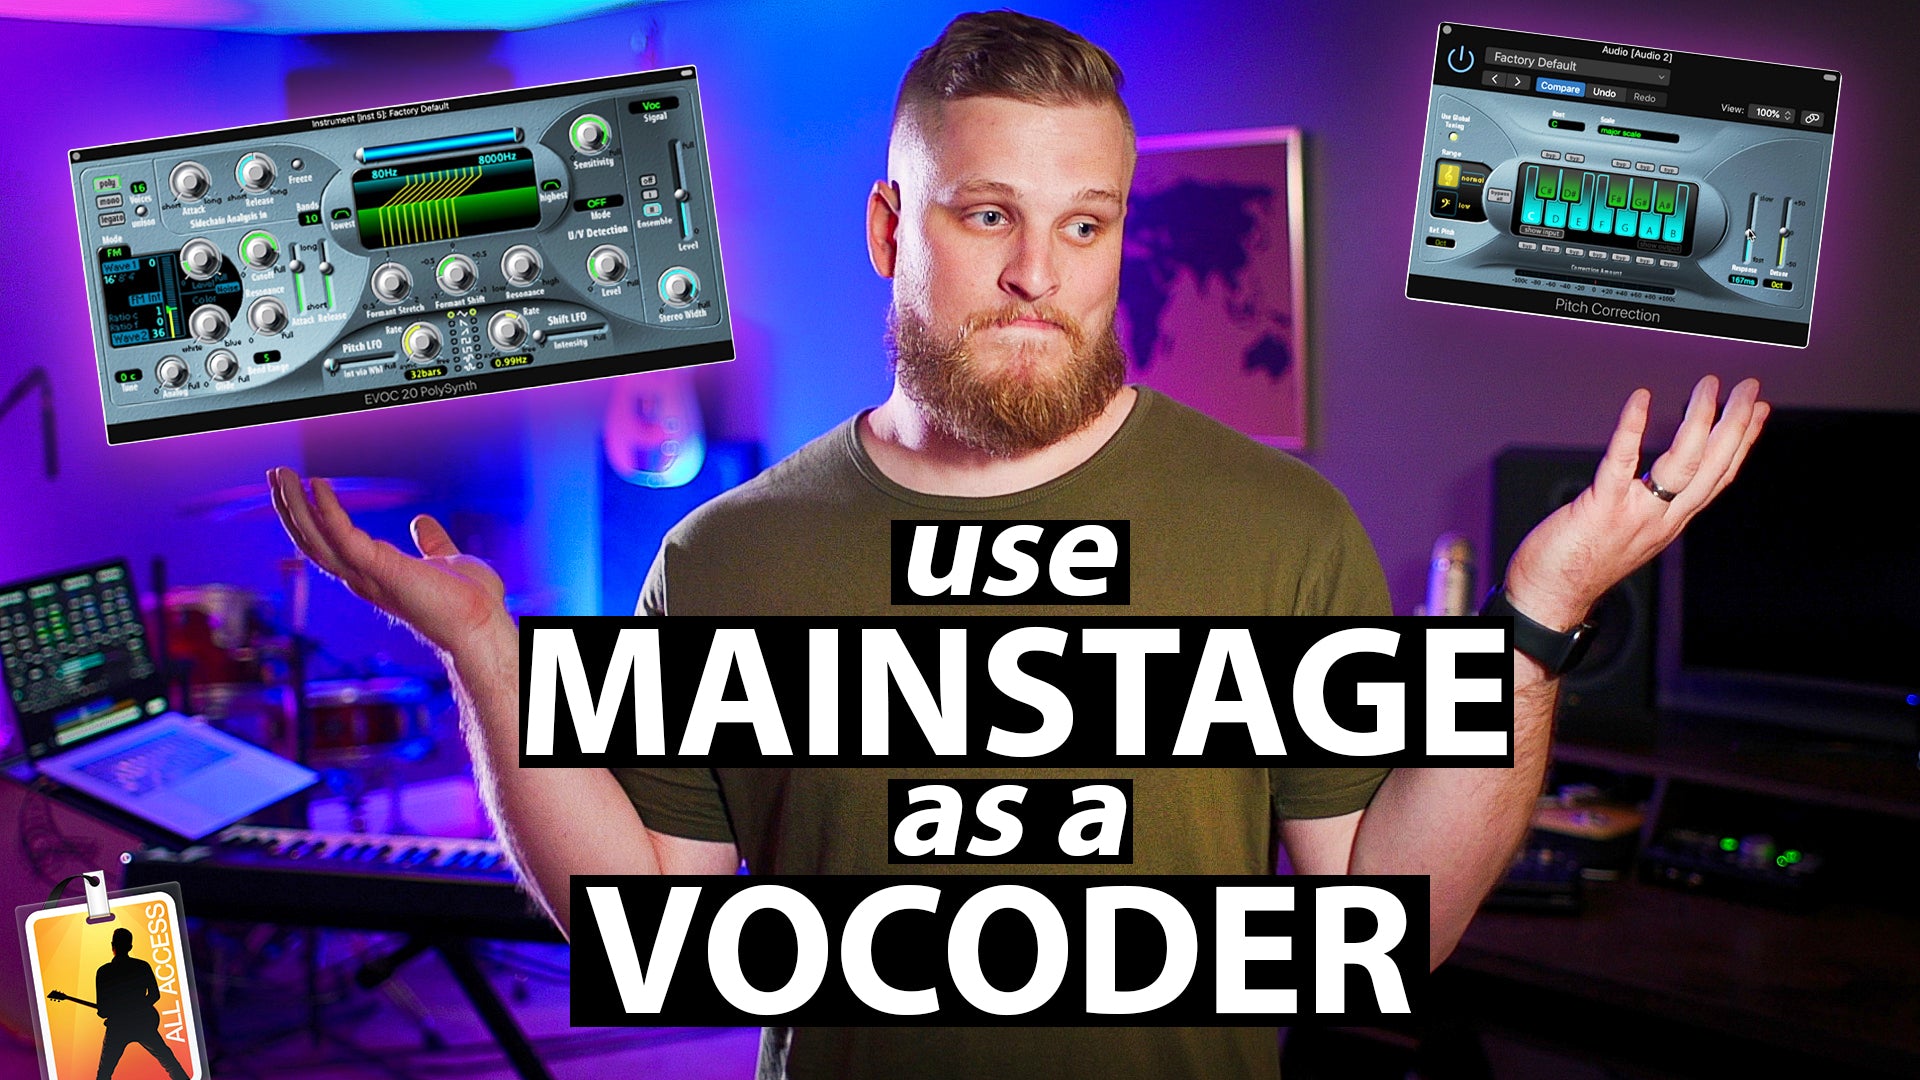 MainStage Tutorial: How to Use MainStage as a Vocoder - Part 2